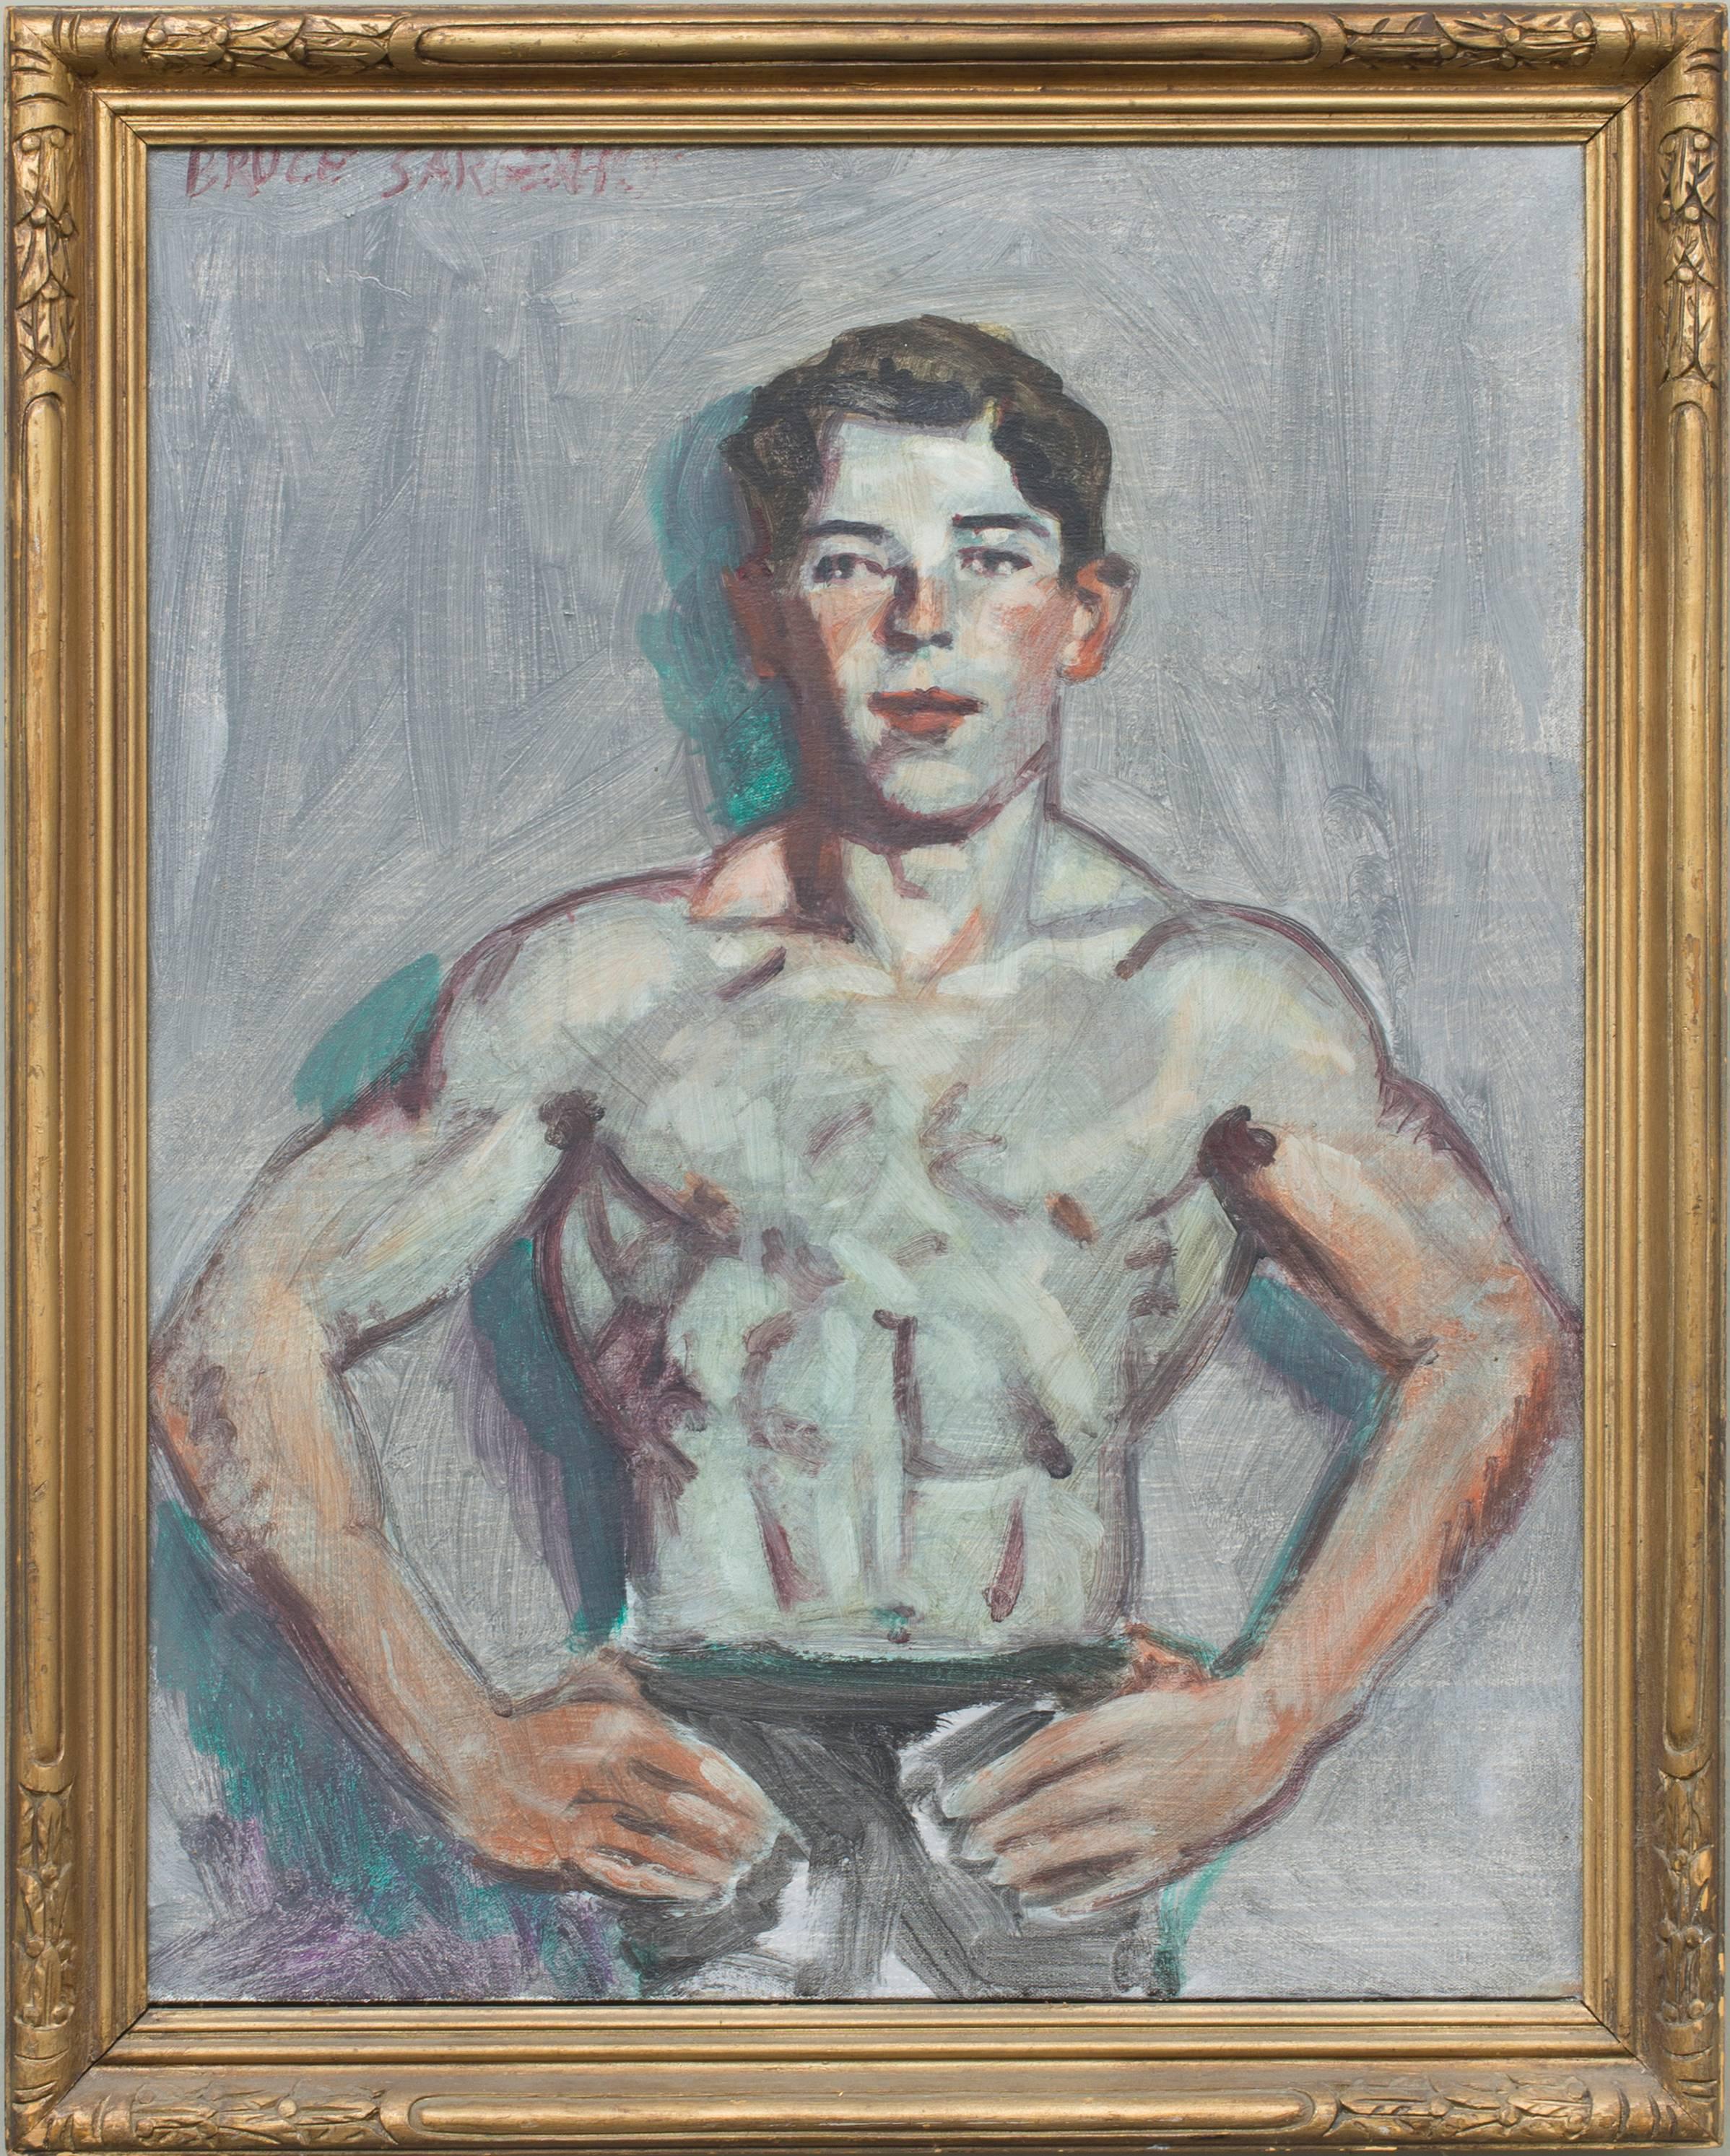 Mark Beard Figurative Painting - Young Swimmer (Modern, Academic Style Portrait Painting in Antique Gold Frame)